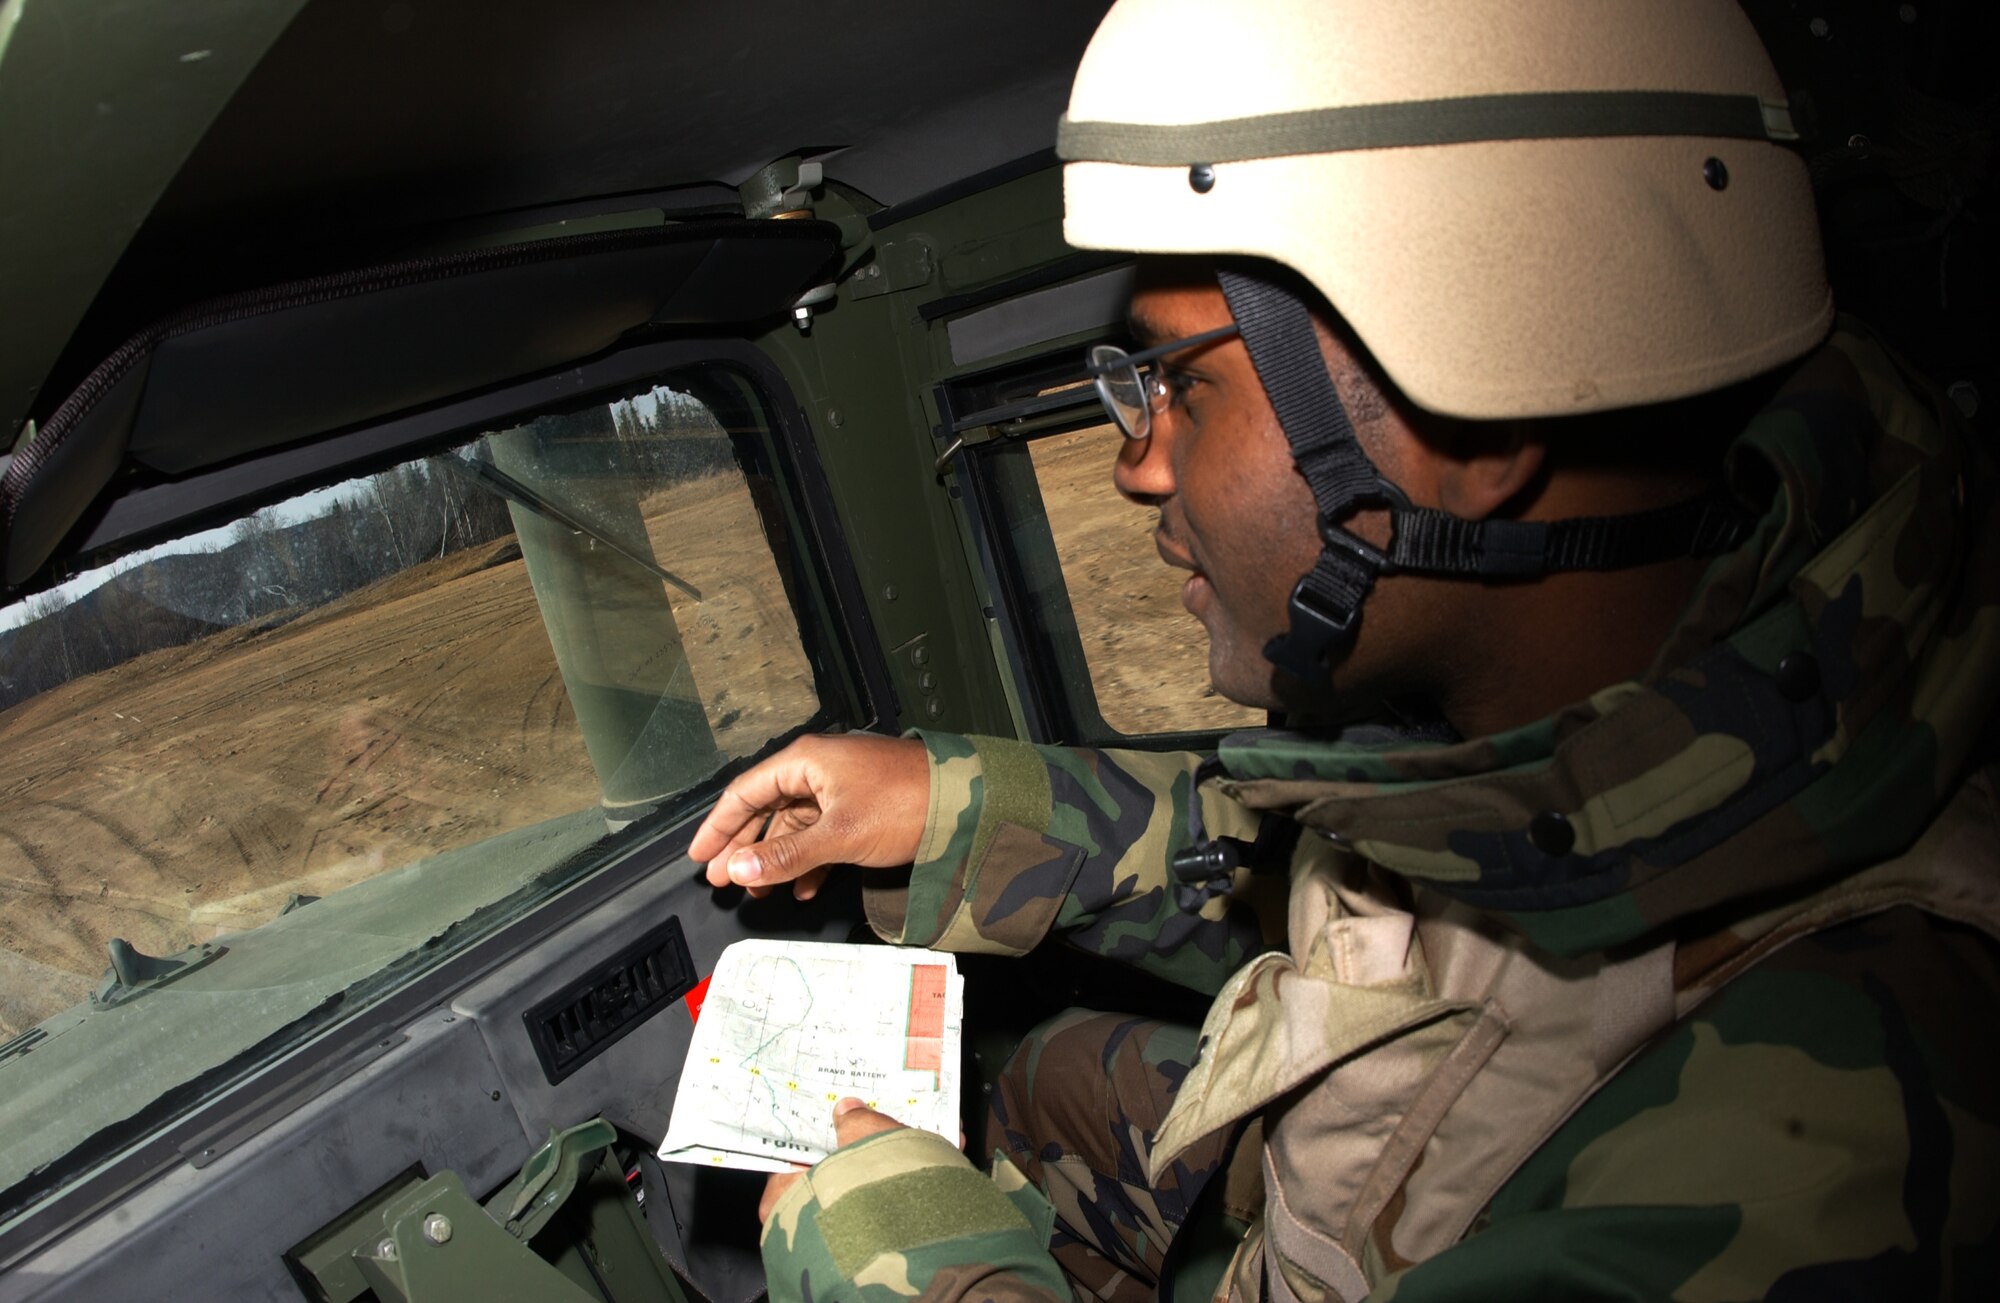 EIELSON AIR FORCE BASE, Alaska -- Senior Airman Reynold Black, 3rd Air Support Operations Squadron information management, guides the Humvee driver to certain locations using a map for a vehicle navigation exercise on May 16th during Operation URSA Minor. The 3rd Air Support Operations Squadron trains, equips, and maintains mission-ready Air Liaison, Terminal Attack Control, and Weather Observation/Forecasting elements to support the U.S. Army Alaska 1st Stryker Brigade Combat Team. (U.S. Air Force Photo by Airman 1st Class Jonathan Snyder) 